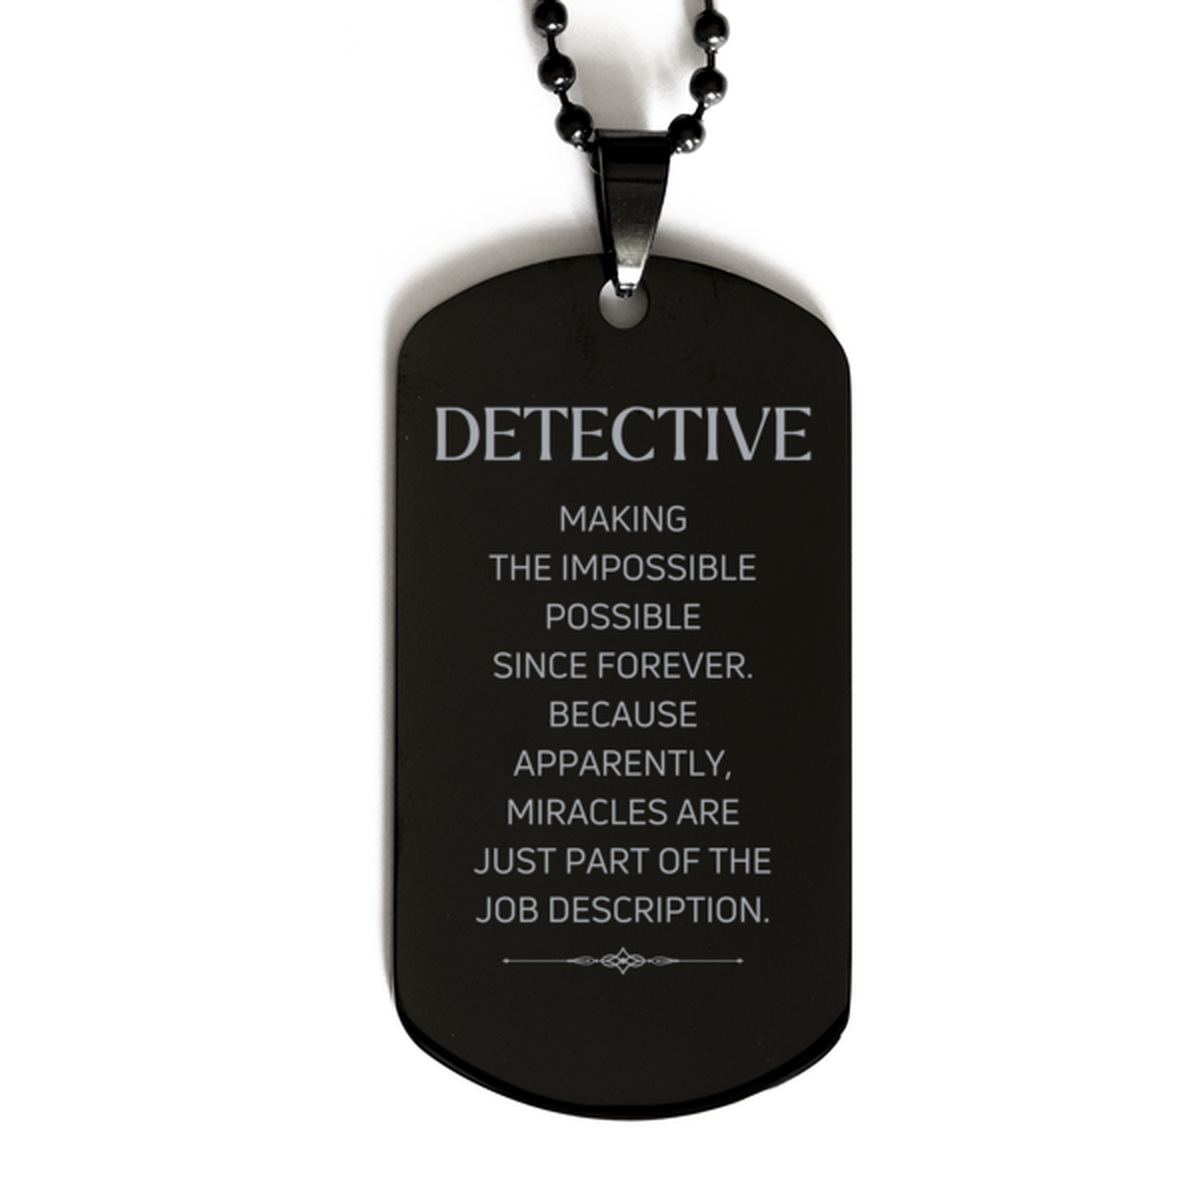 Funny Detective Gifts, Miracles are just part of the job description, Inspirational Birthday Black Dog Tag For Detective, Men, Women, Coworkers, Friends, Boss